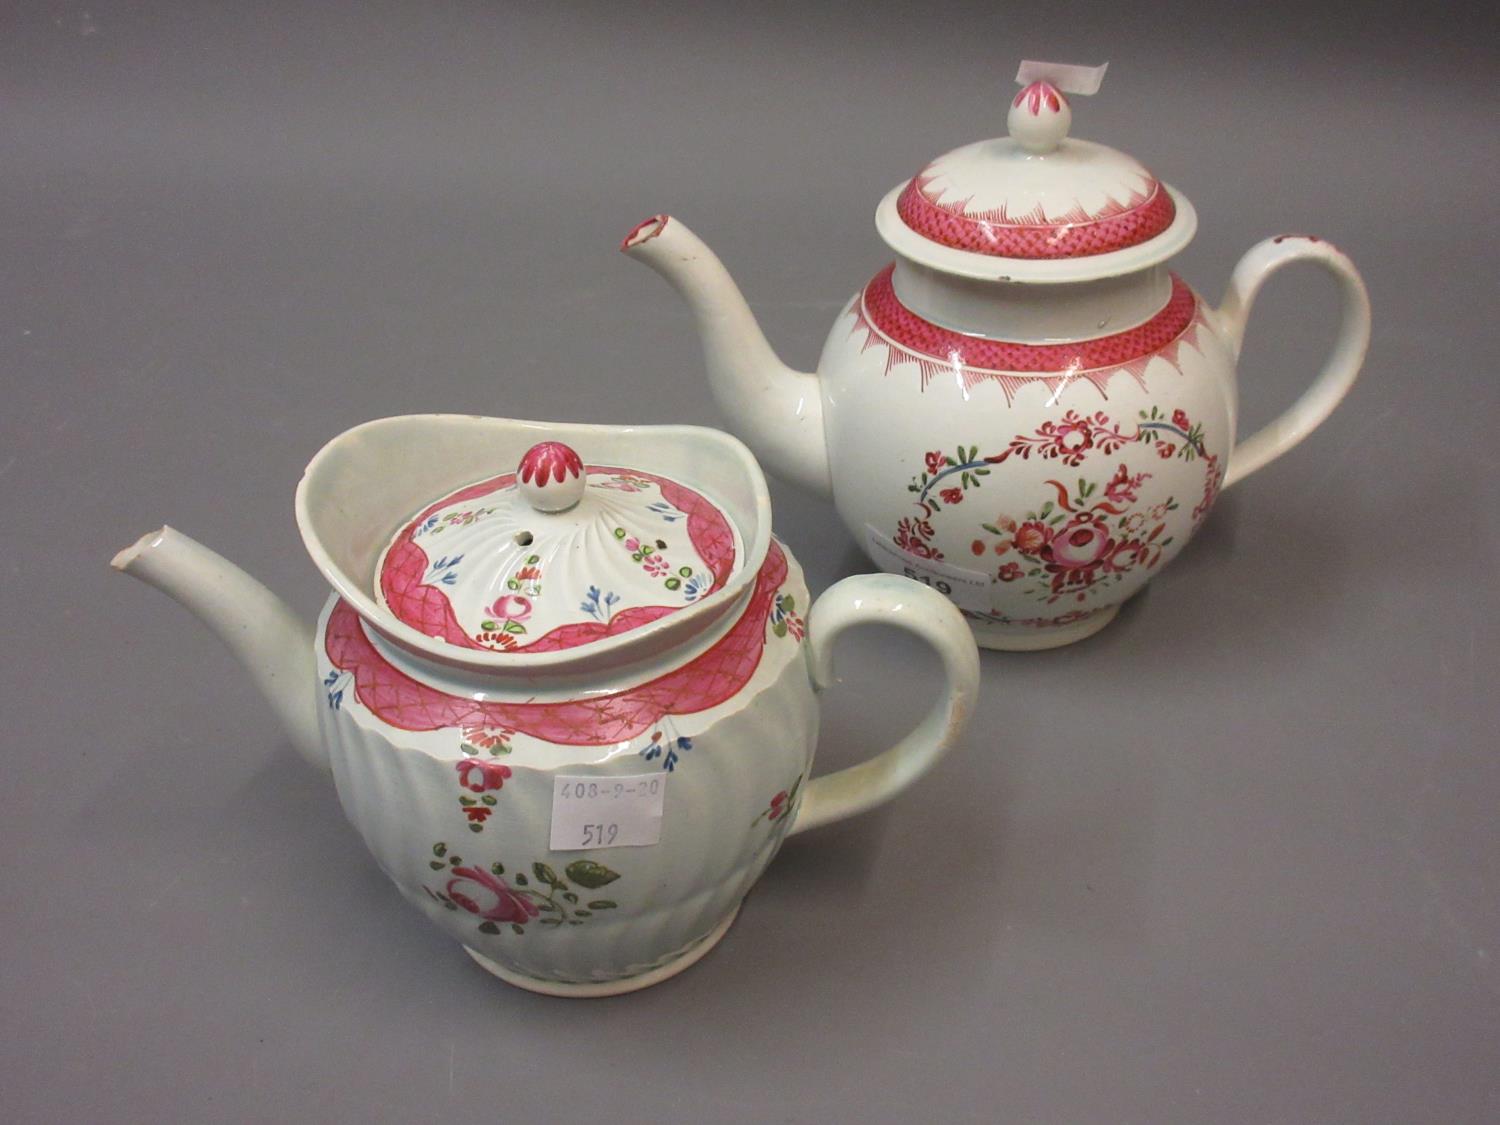 Late 18th or early 19th Century Pearlware teapot painted with flowers within pink borders, 6ins high